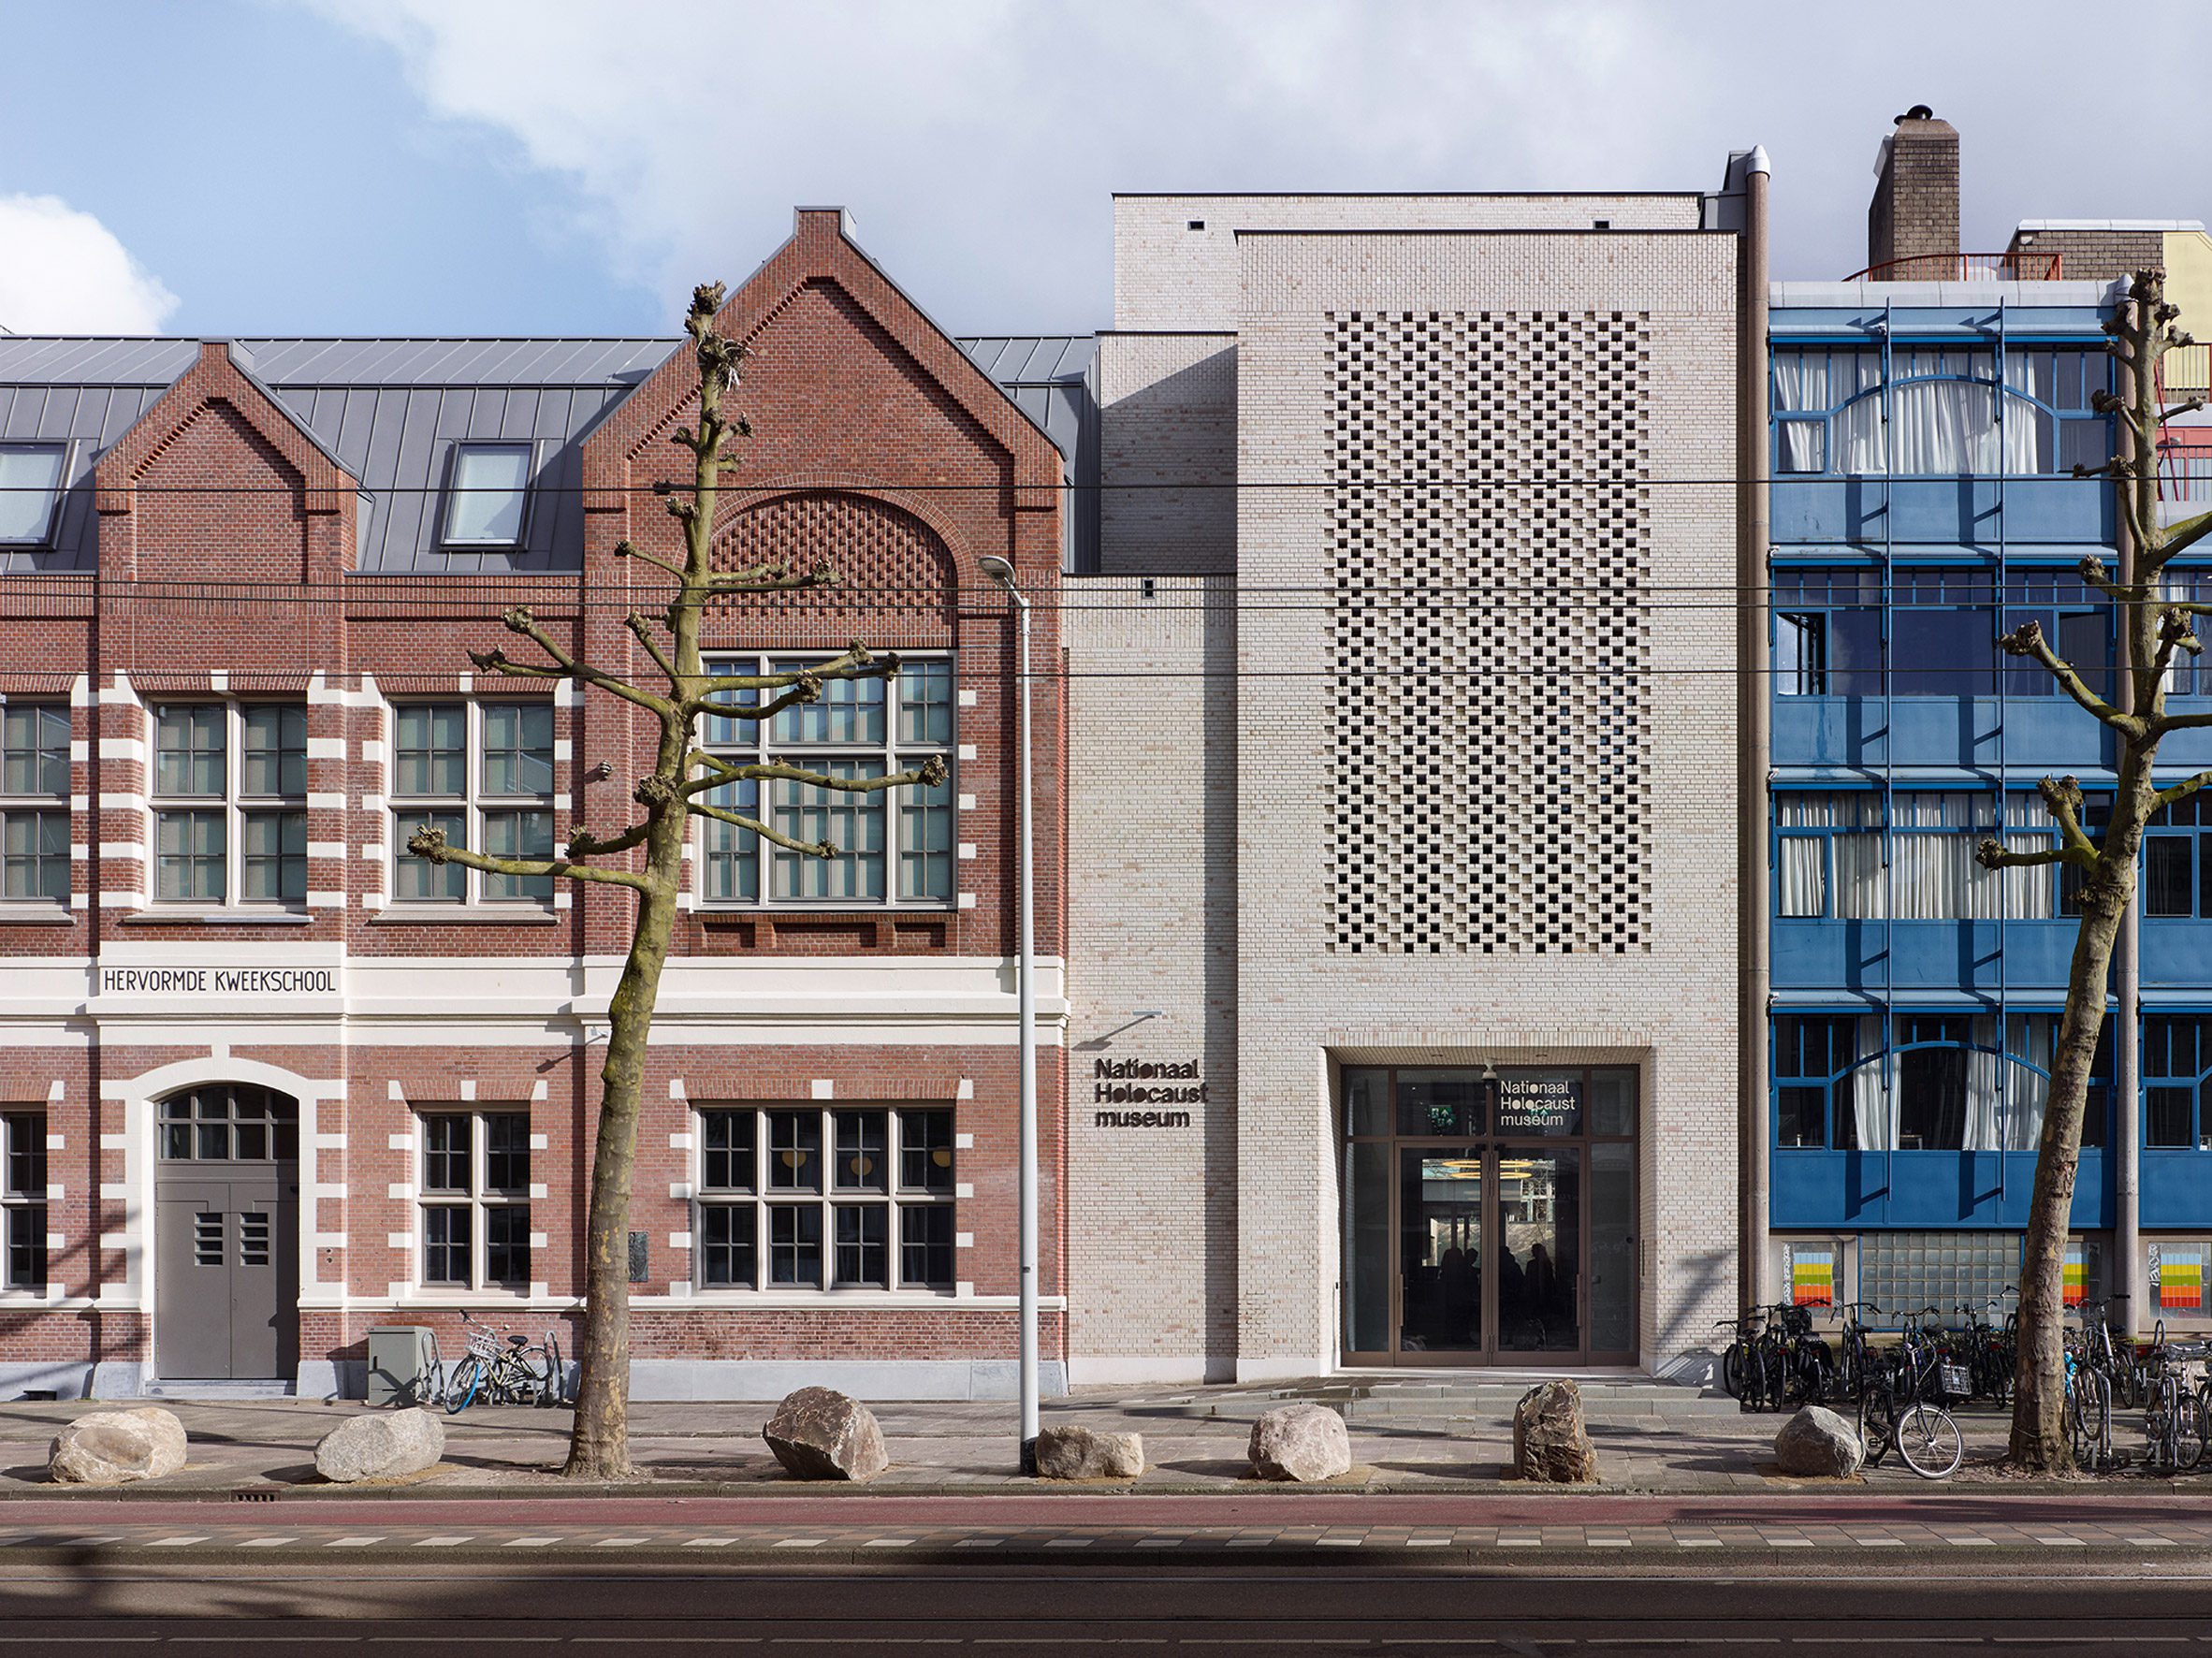 Front facade of National Holocaust Museum and former Kweekschool in the Netherlands